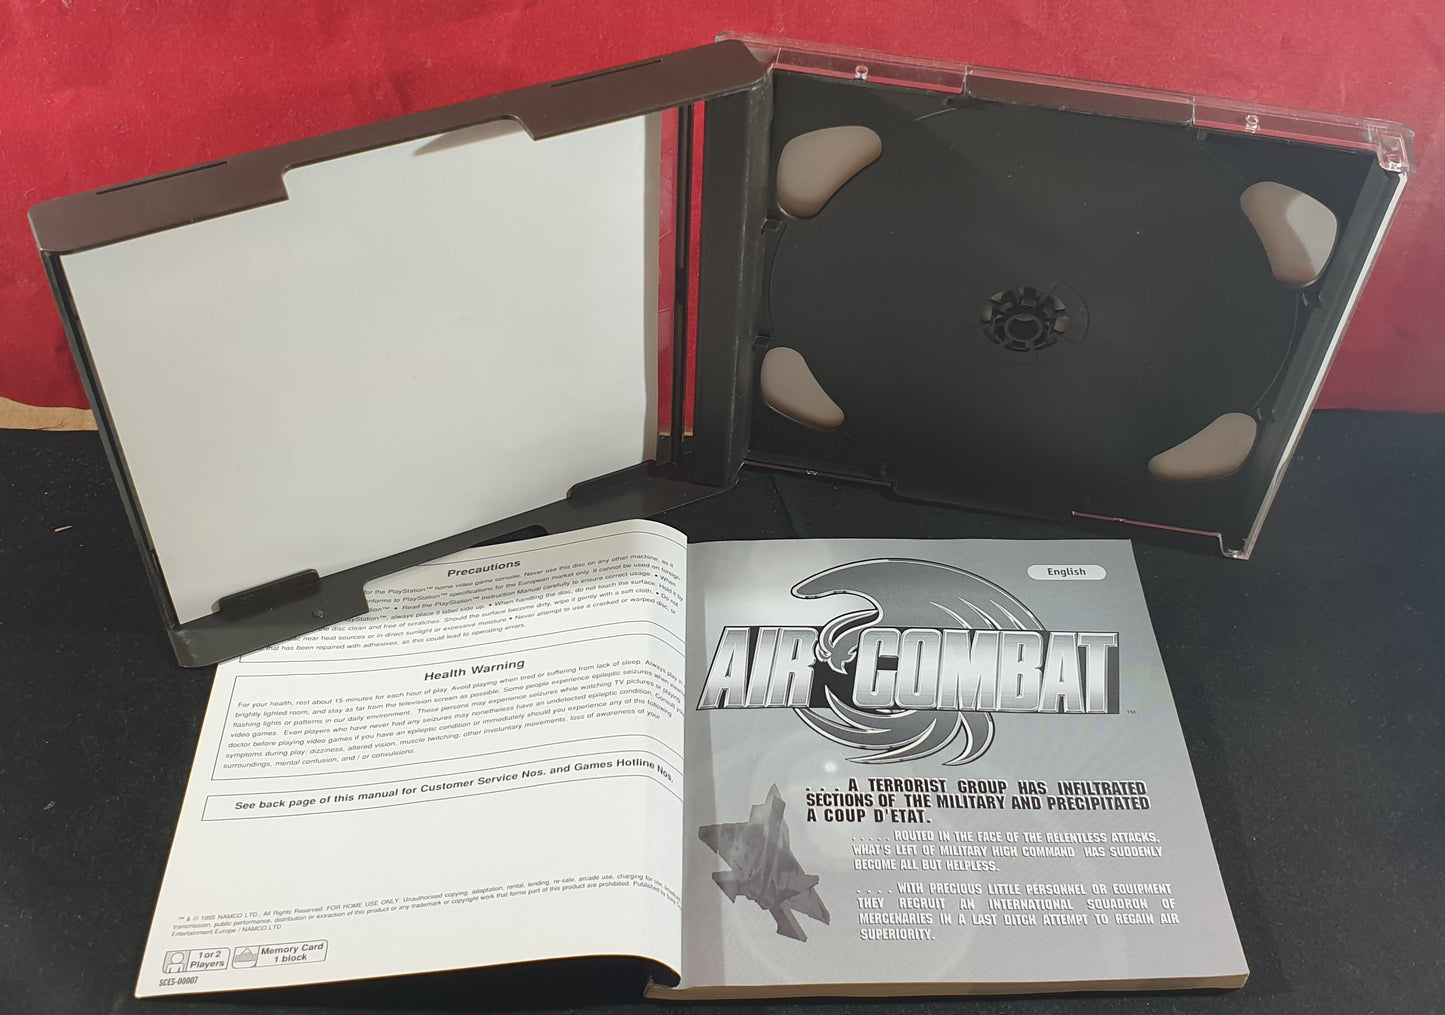 Air Combat Platinum Sony Playstation 1 (PS1) Game